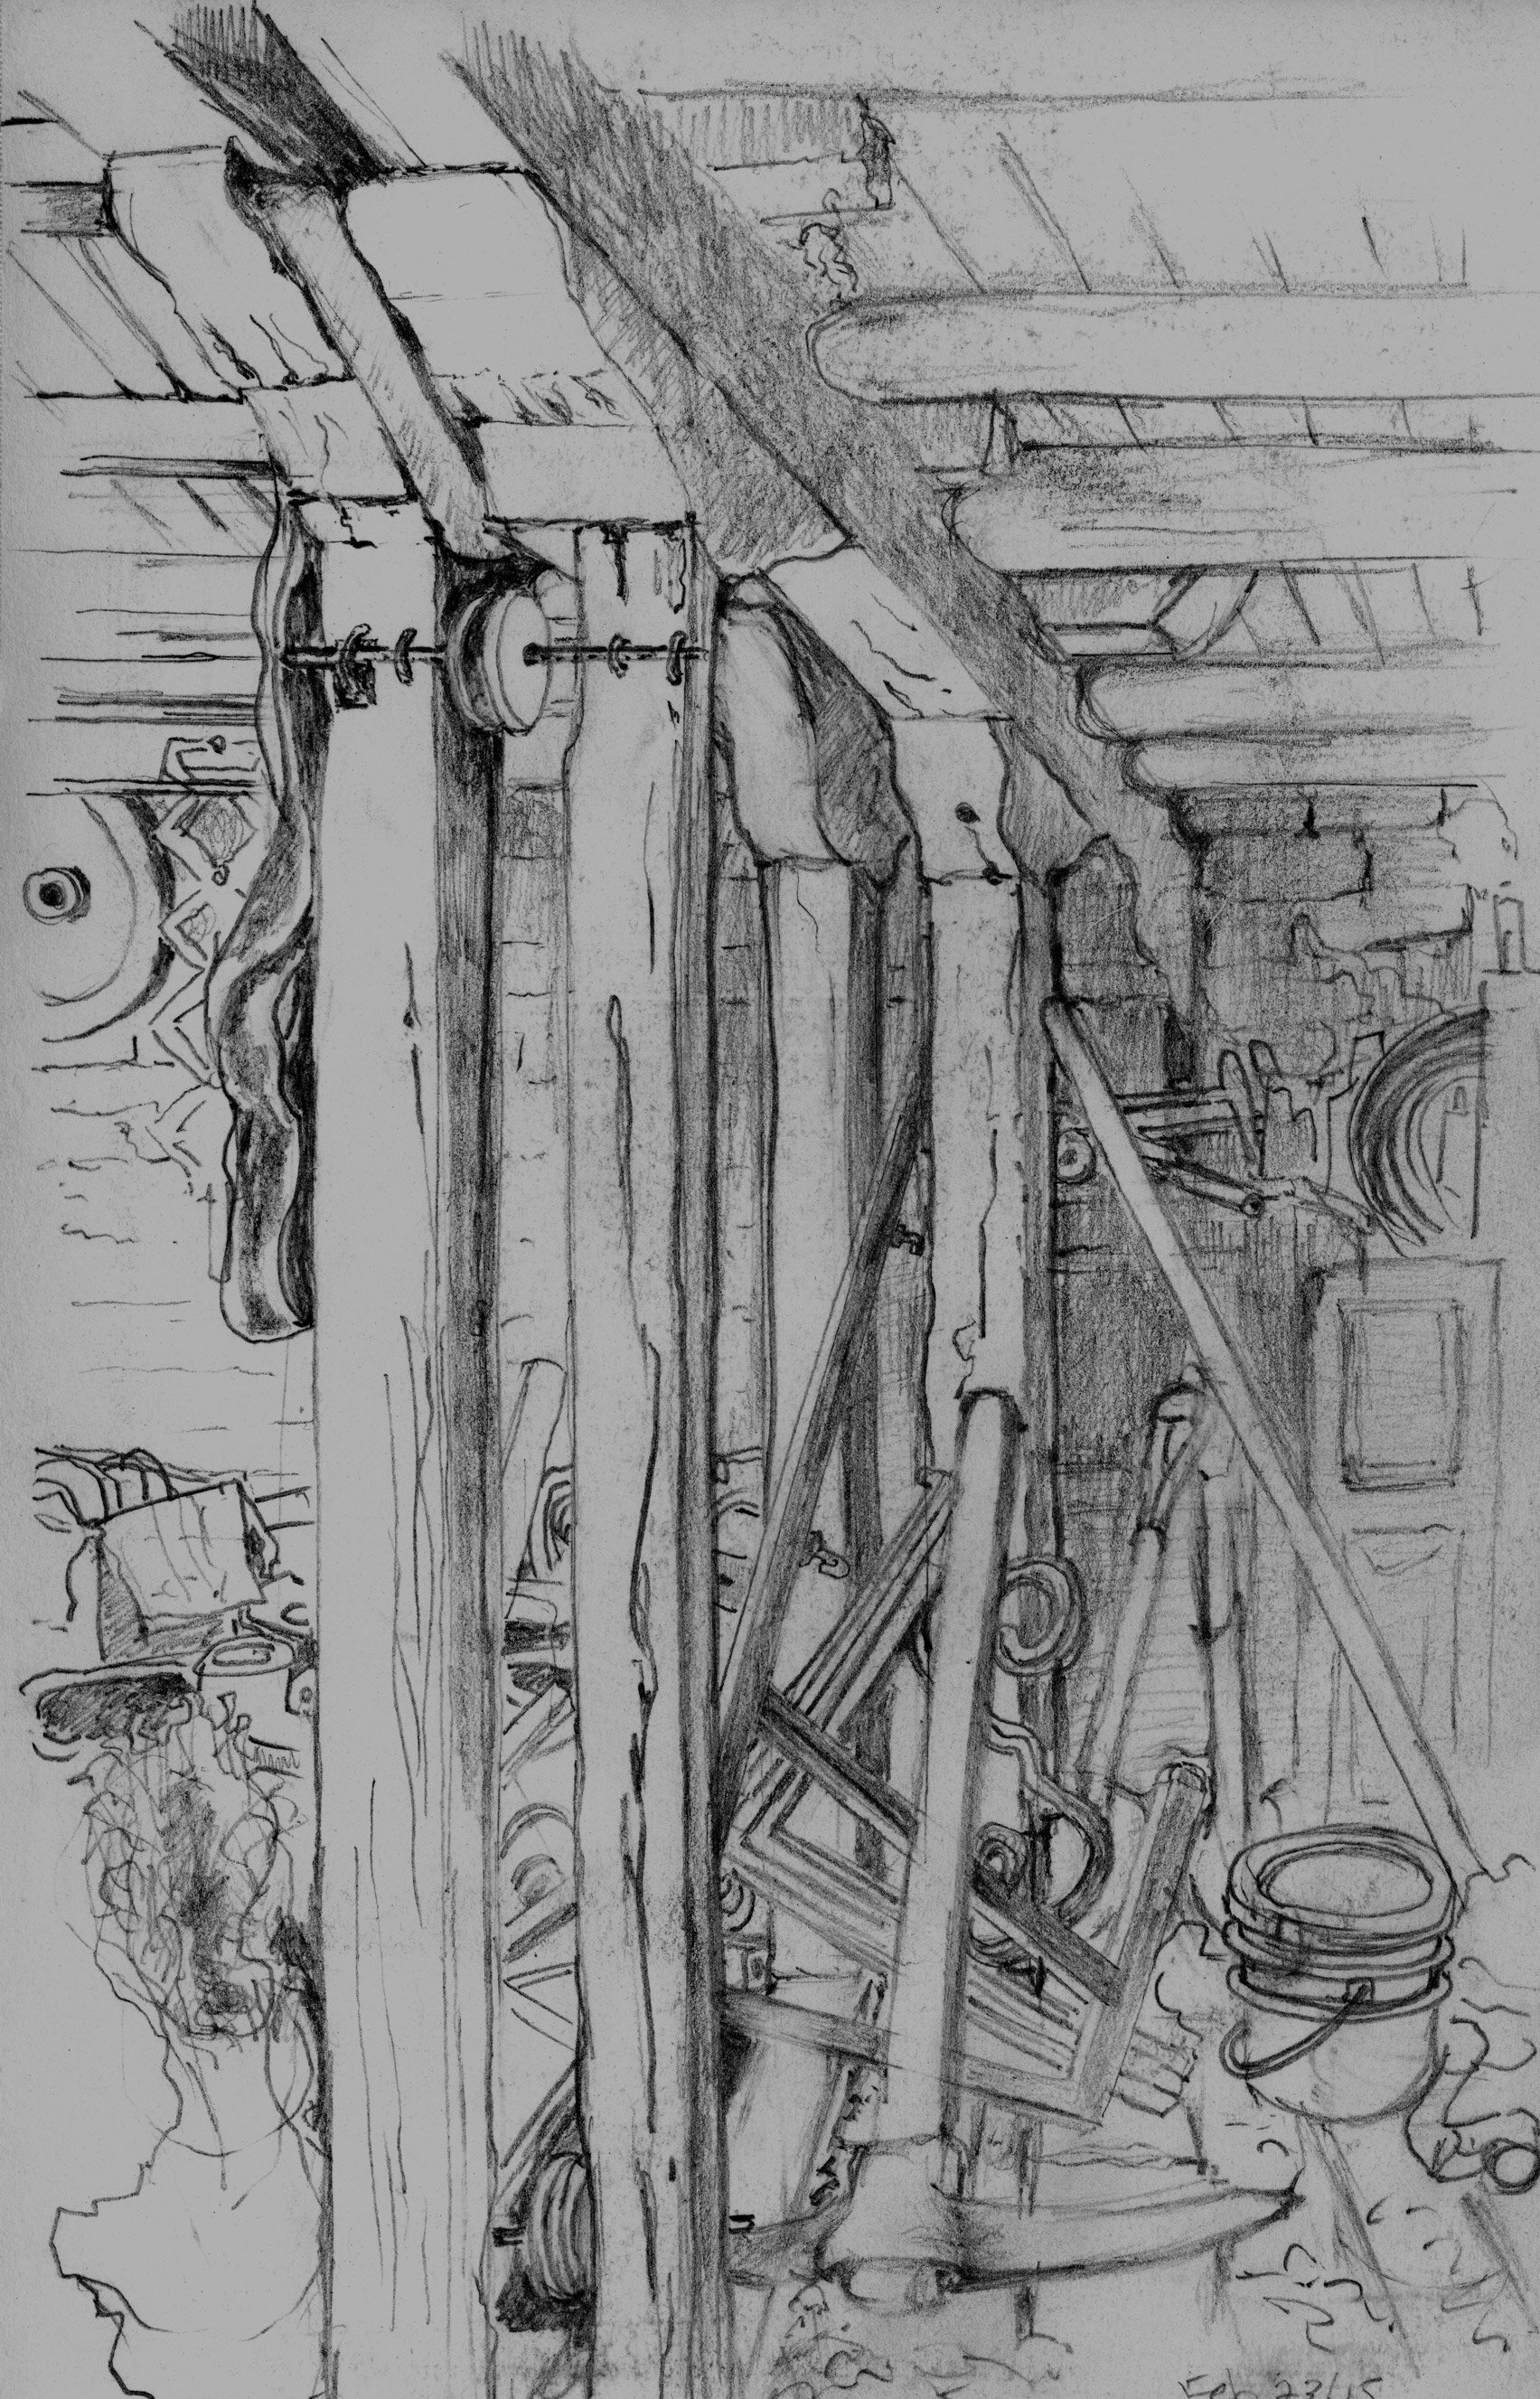   Bandipur Nepal Old Workshop  2015 Pencil on paper 8x5.5 inches 